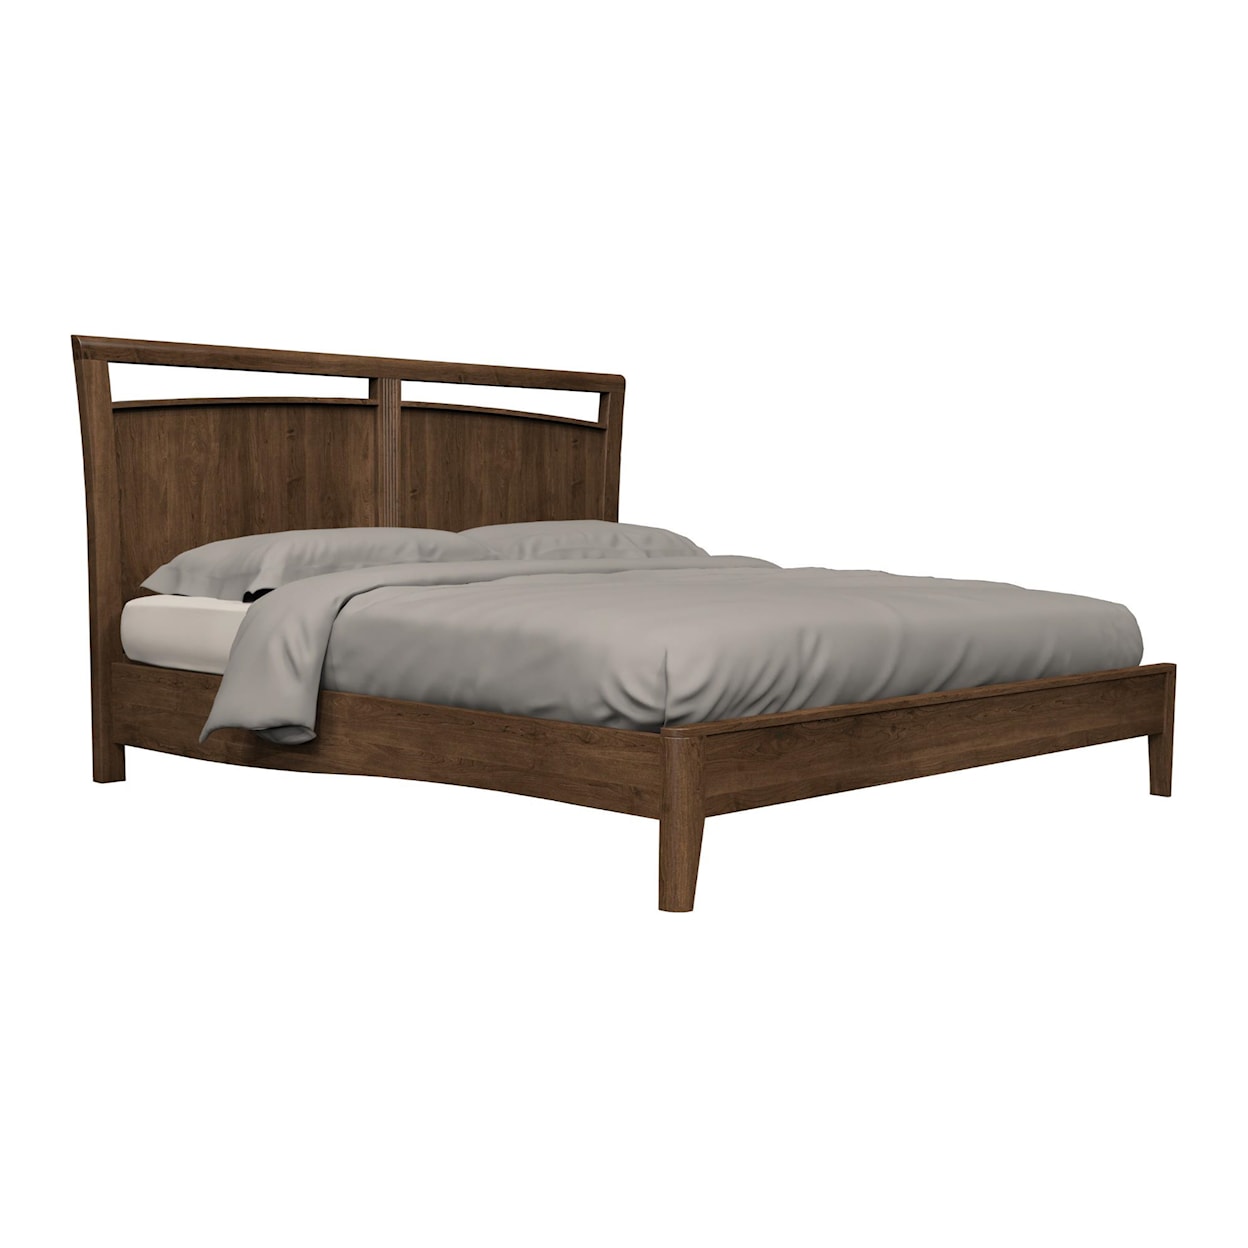 Country View Woodworking Westwood Bedroom King Bed